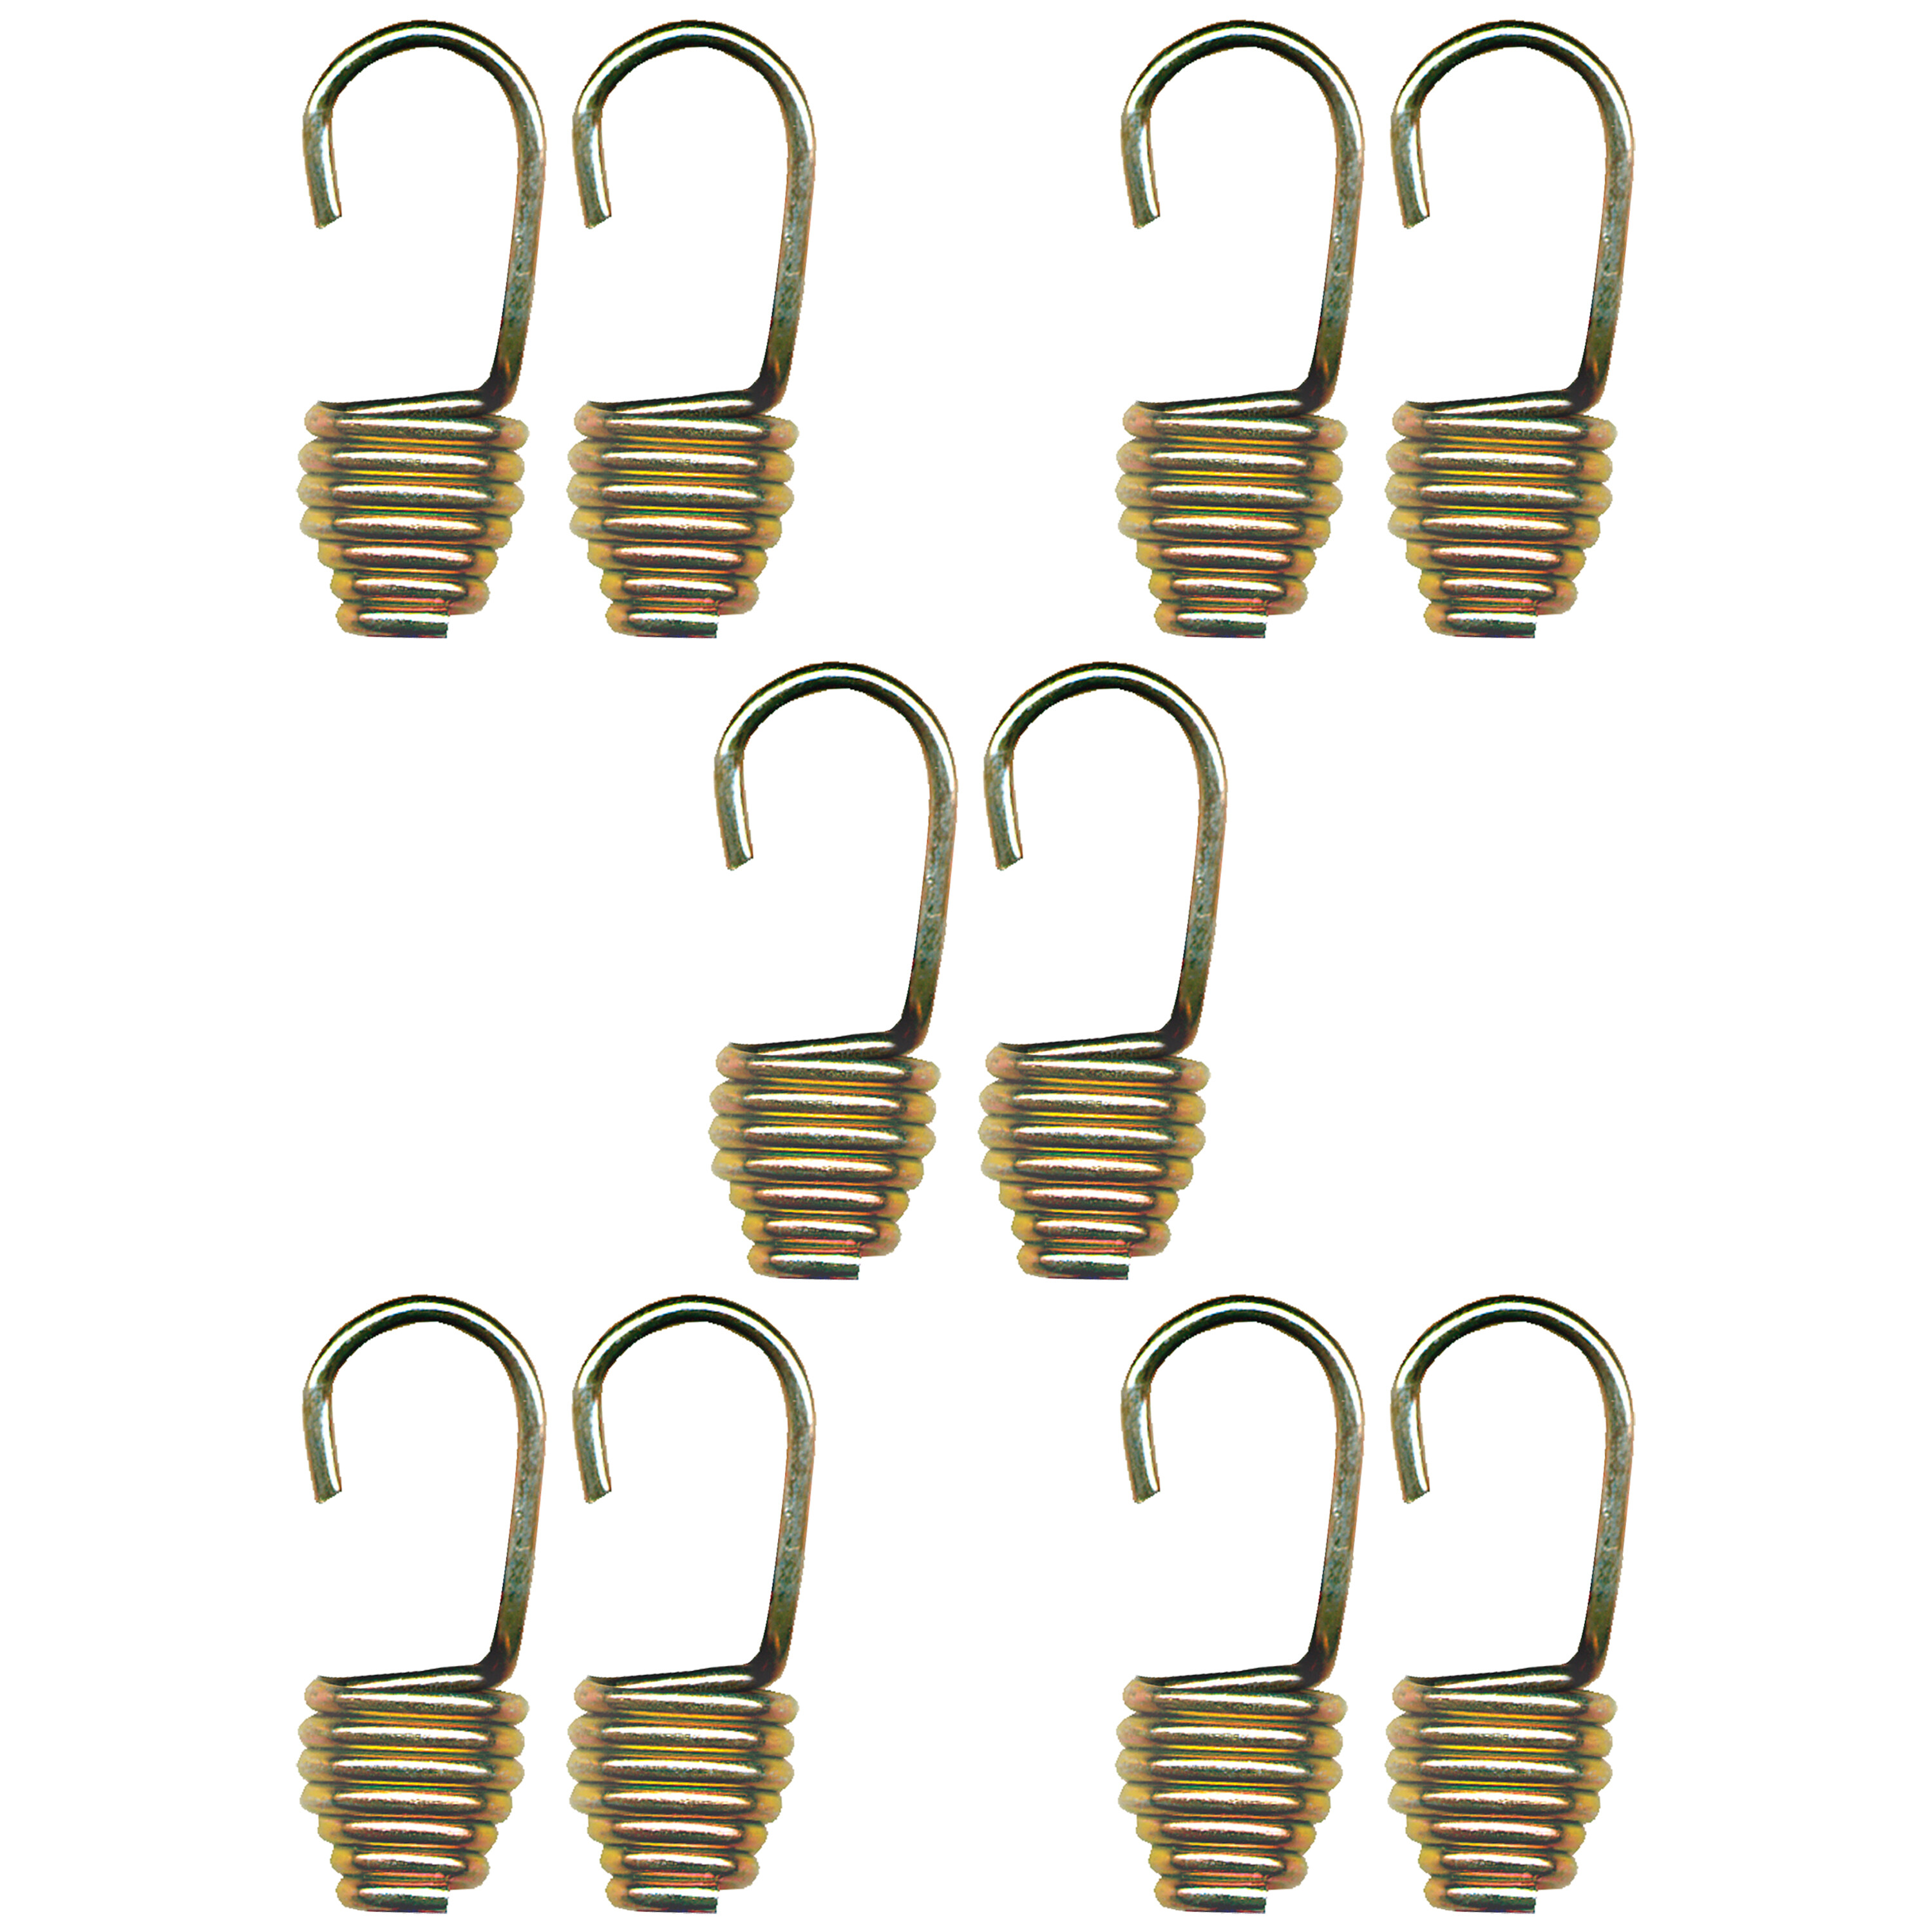 Dichromate Bungee Hooks for Cord